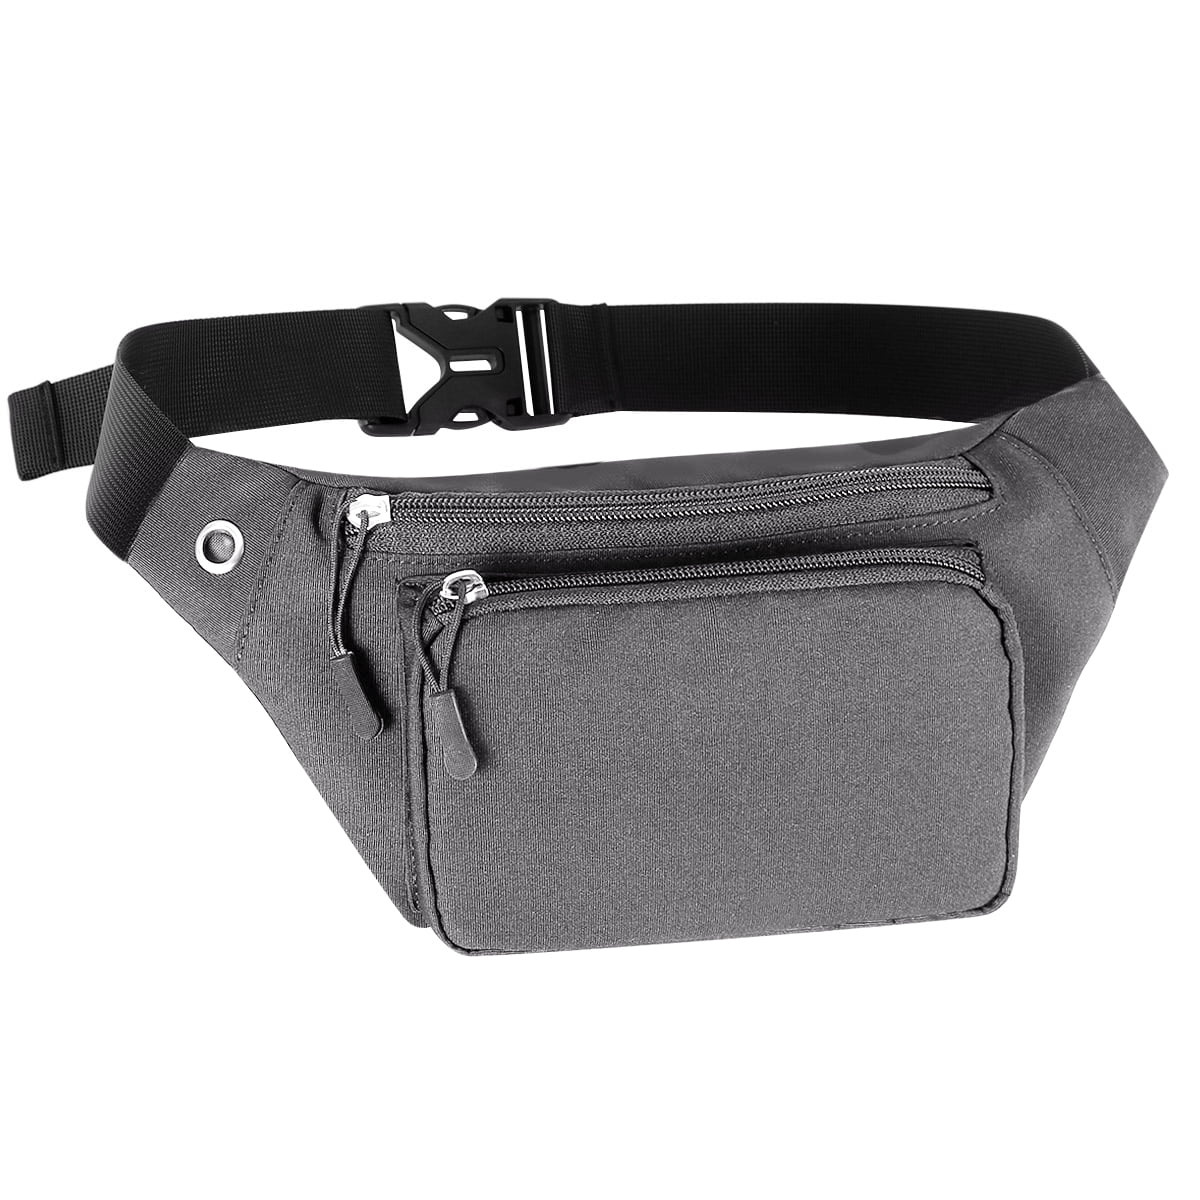 Fanny Pack, Waist Bag Sling Backpack Water Resistant Durable Polyester ...